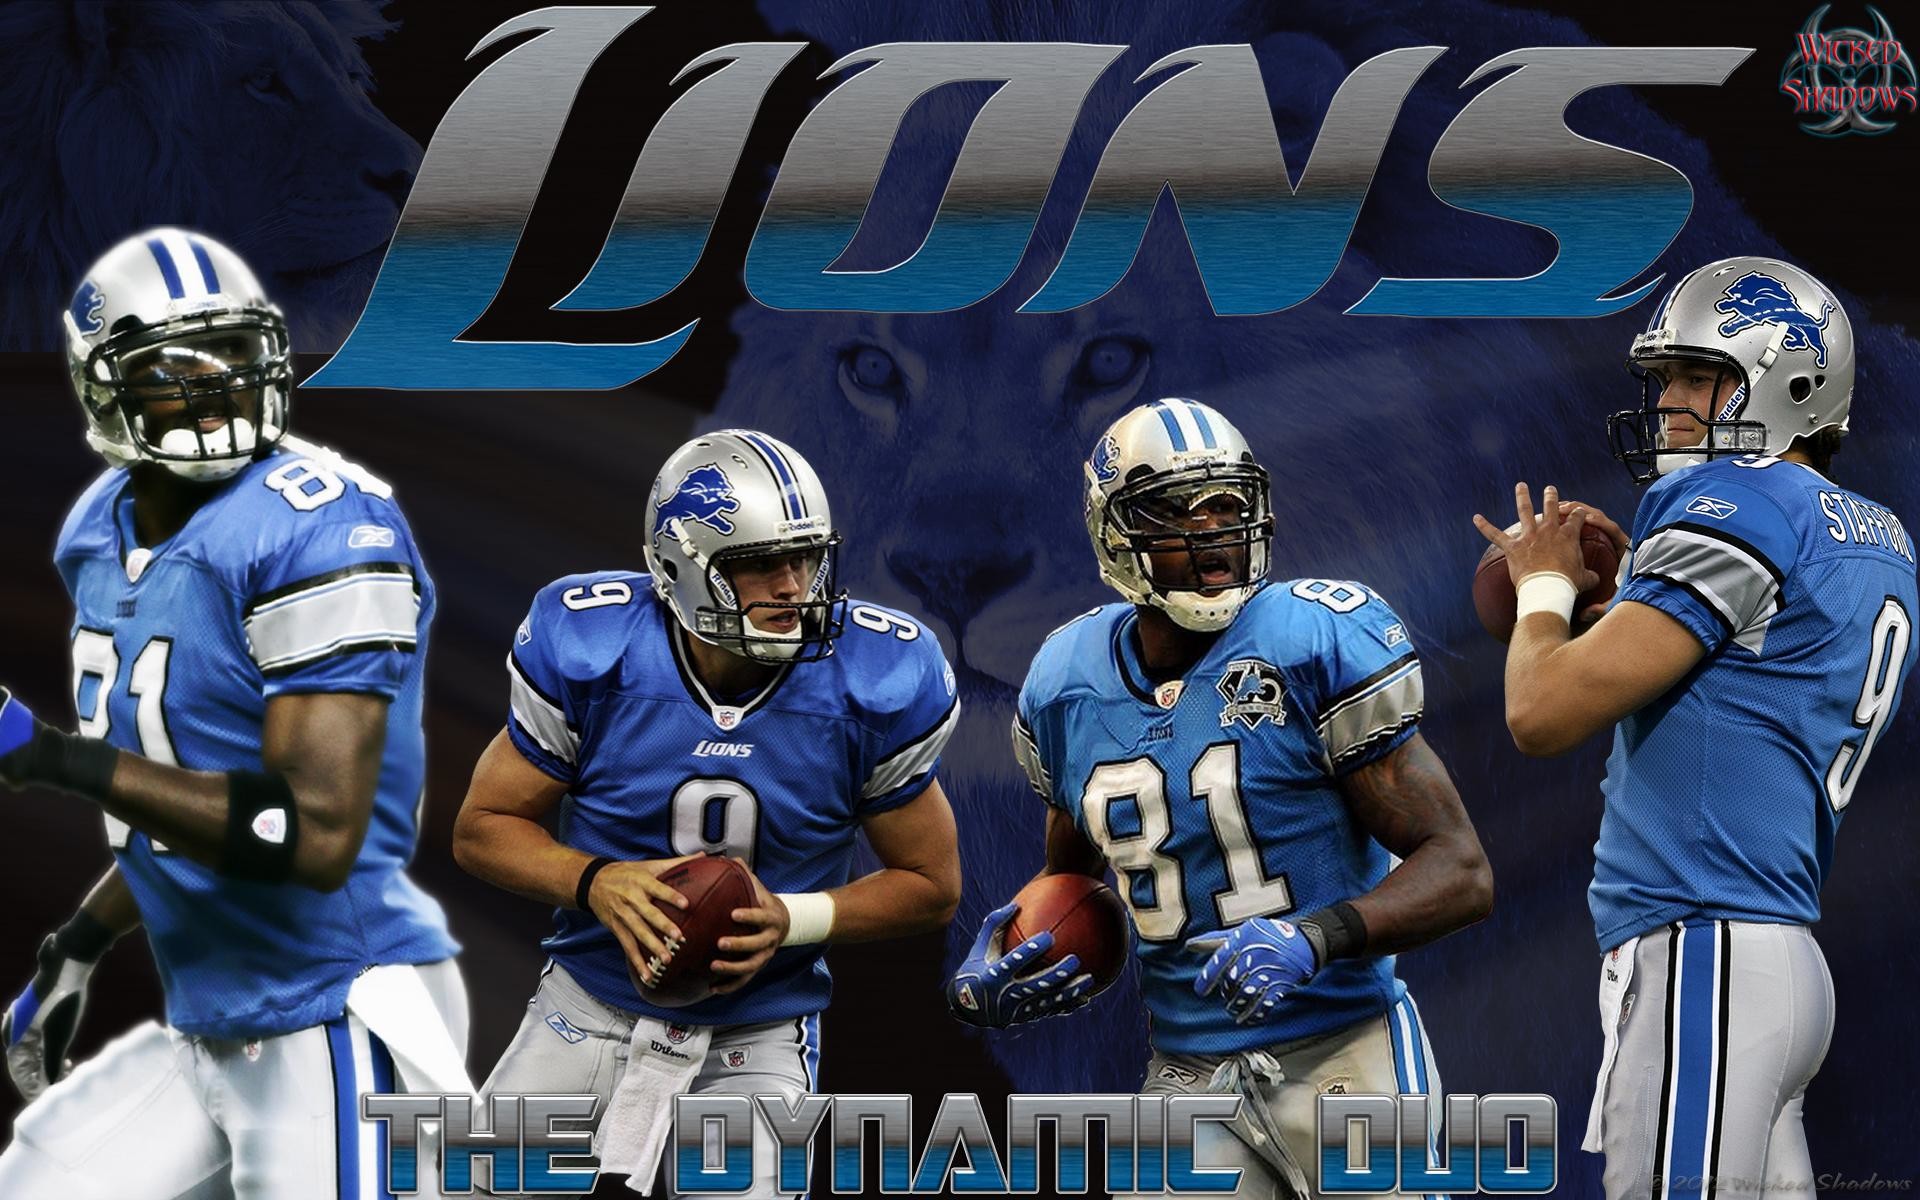 Wallpapers By Wicked Shadows Detroit Lions NFL wallpapers 19201200